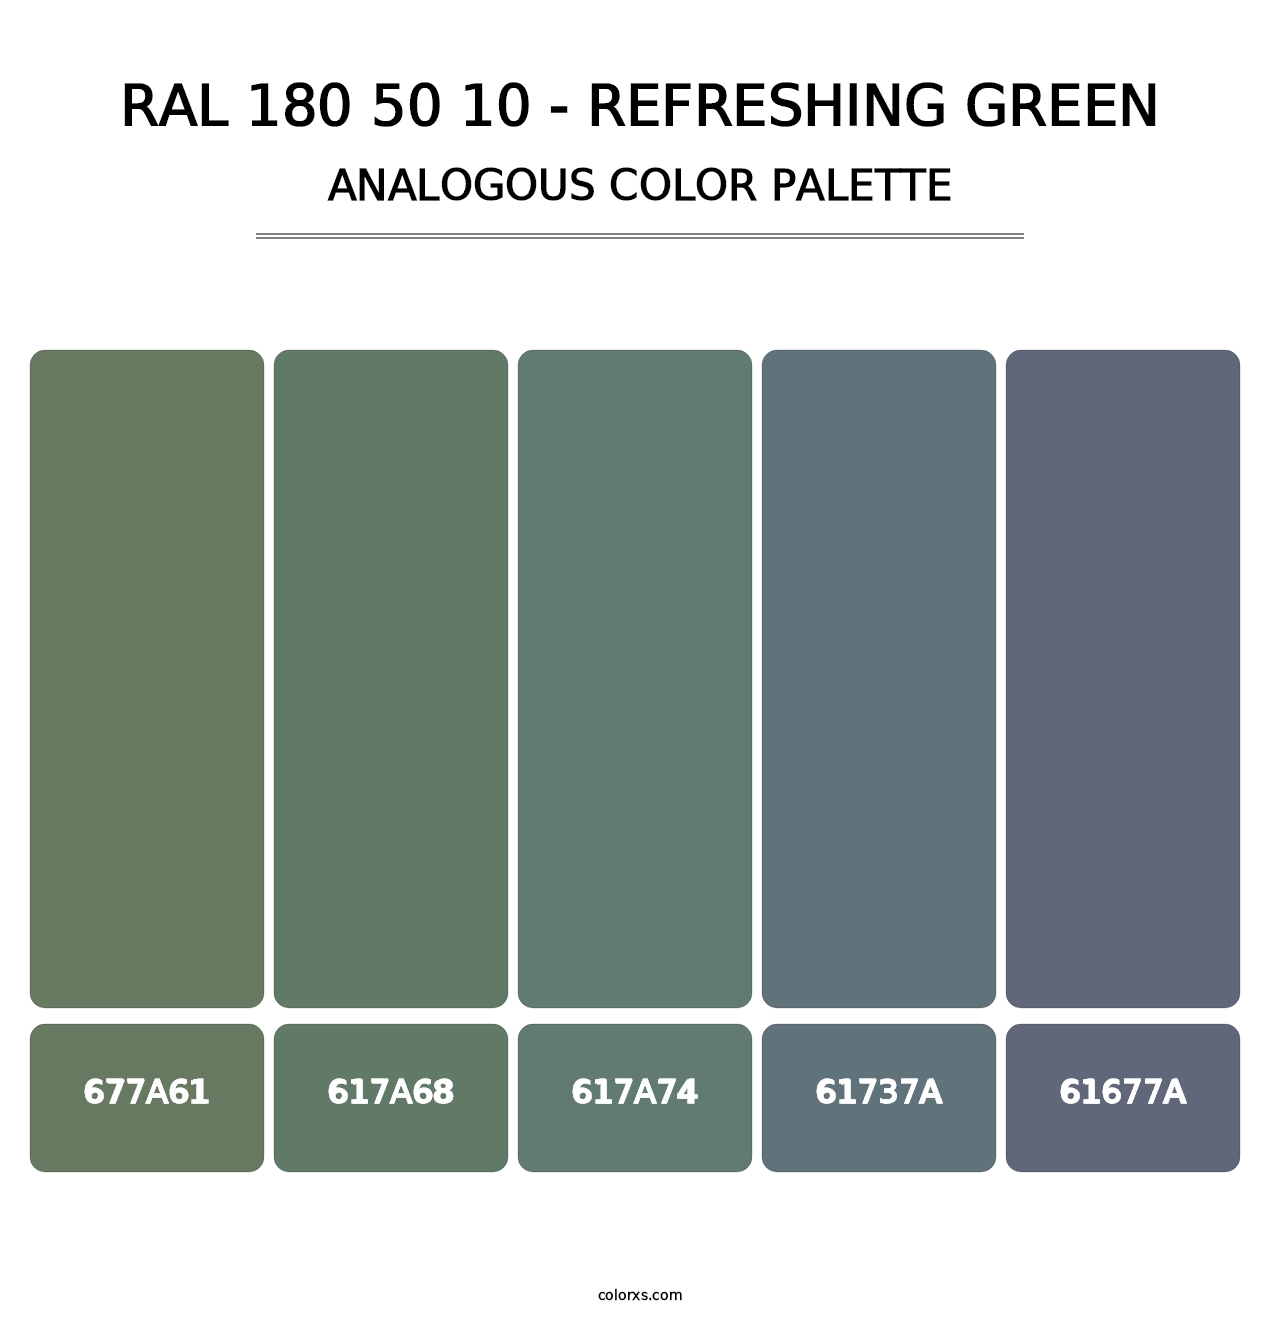 RAL 180 50 10 - Refreshing Green - Analogous Color Palette